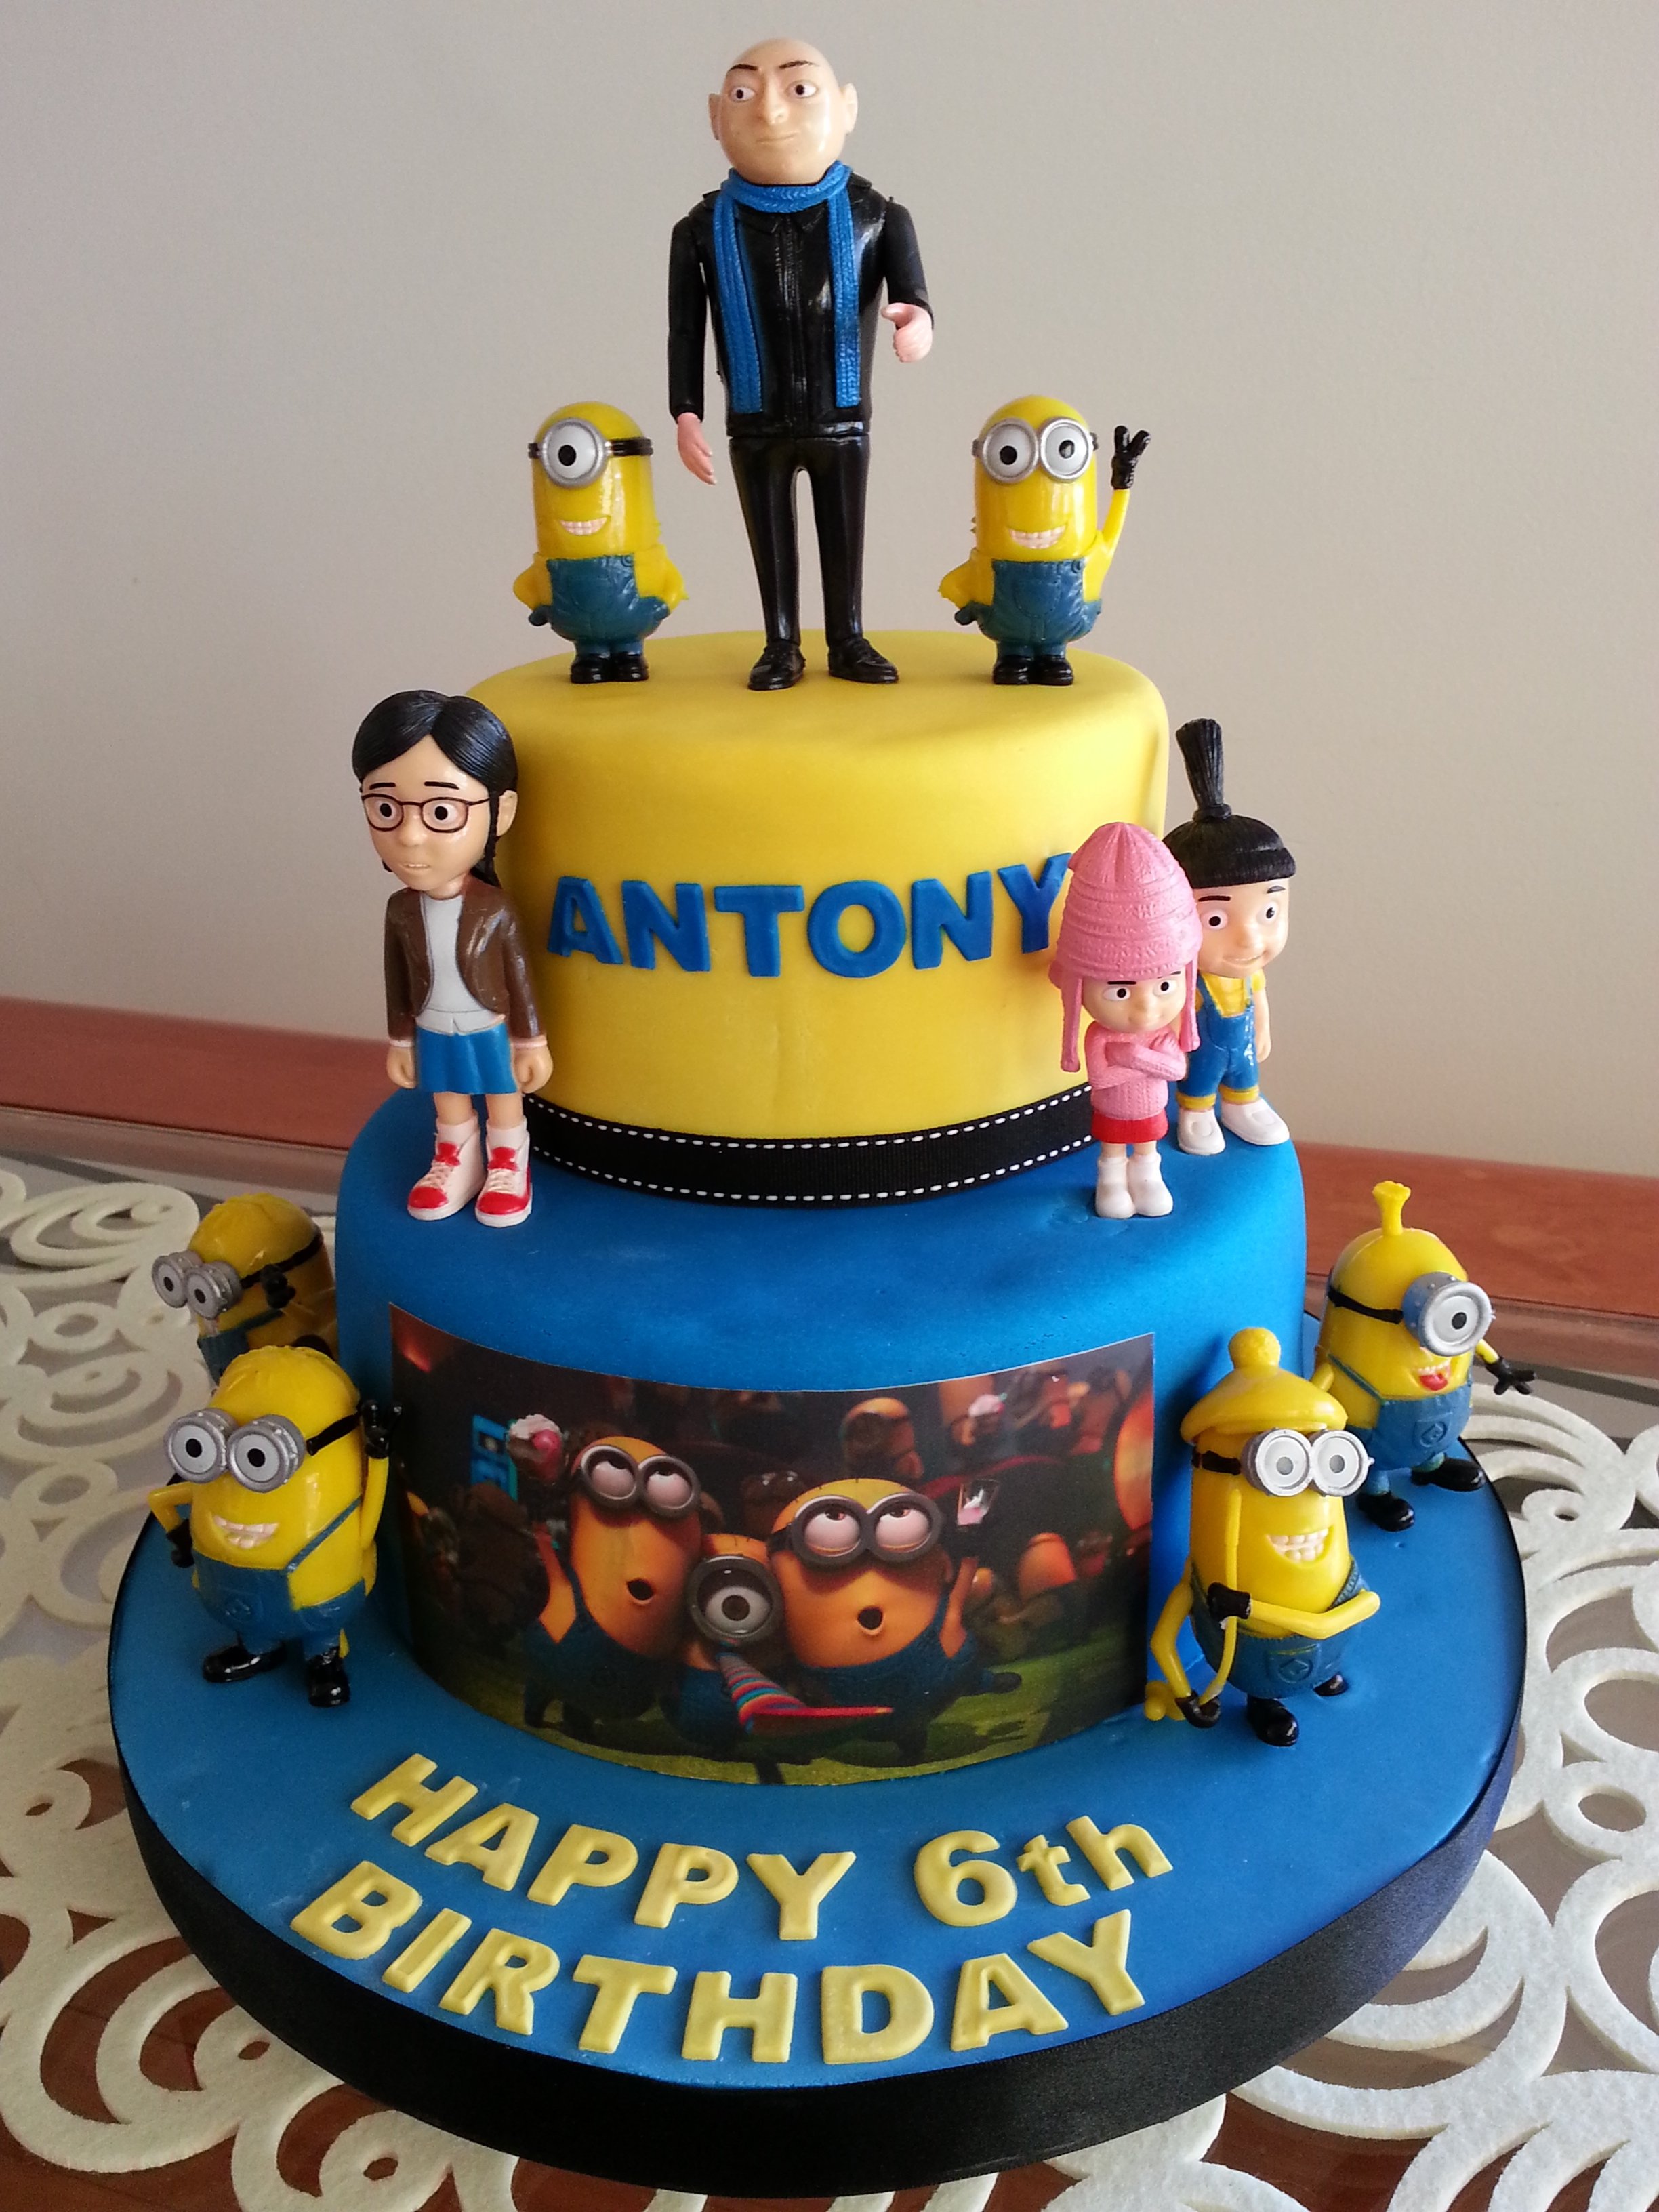 10 Lovable Despicable Me 2 Cake Ideas enjoyed making this cake for my dear friends the paslis family from 2022